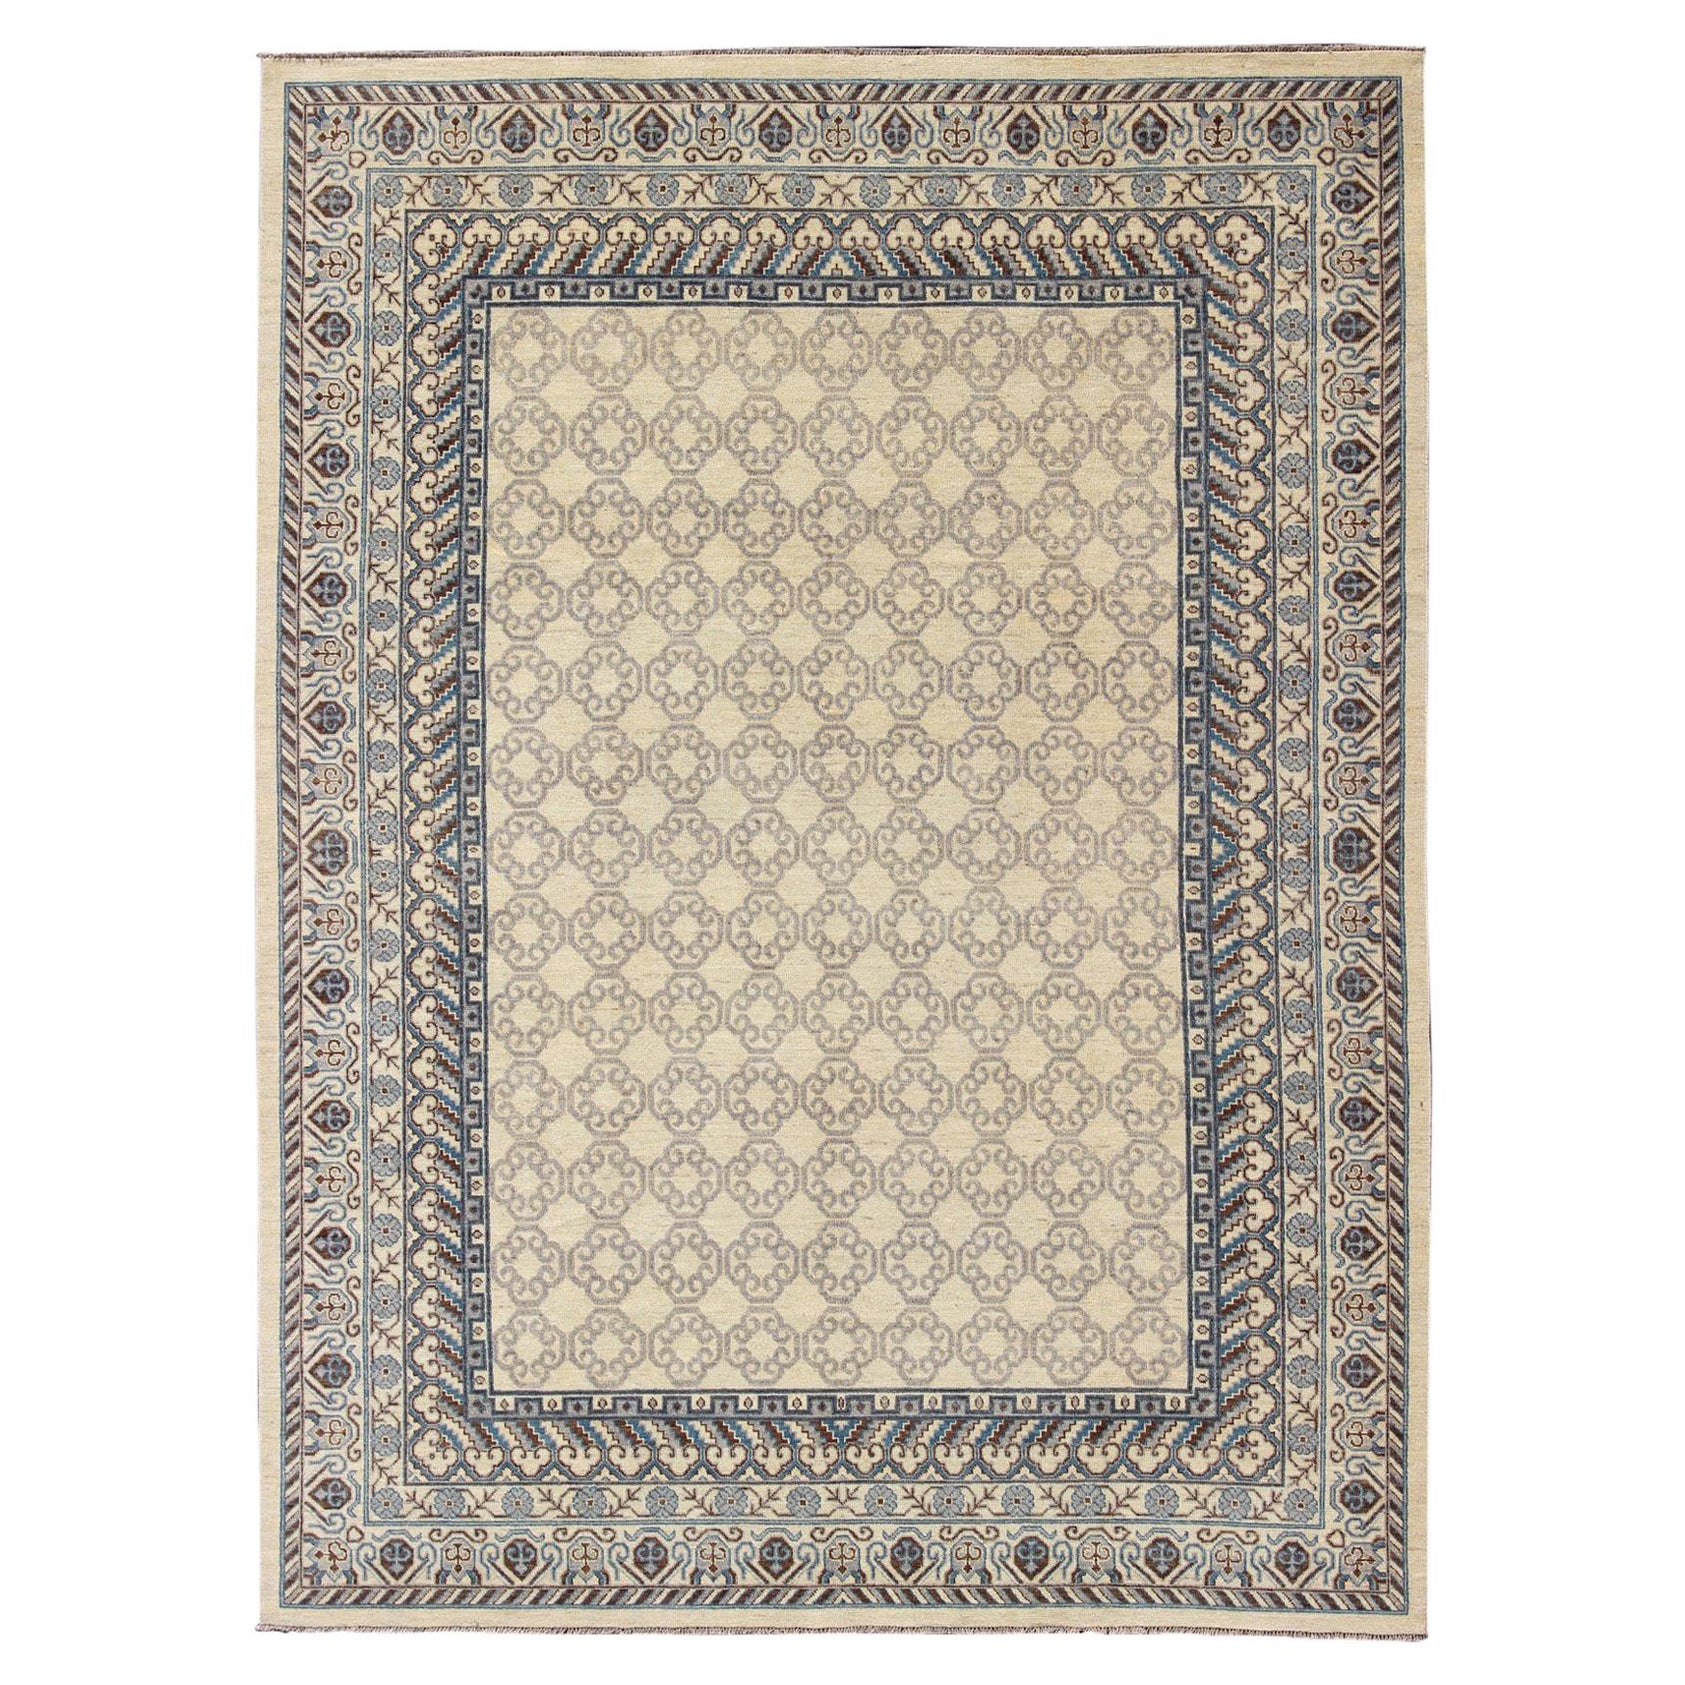 Contemporary Khotan with Geometric Design in Blue, Brown & Cream Colors For Sale